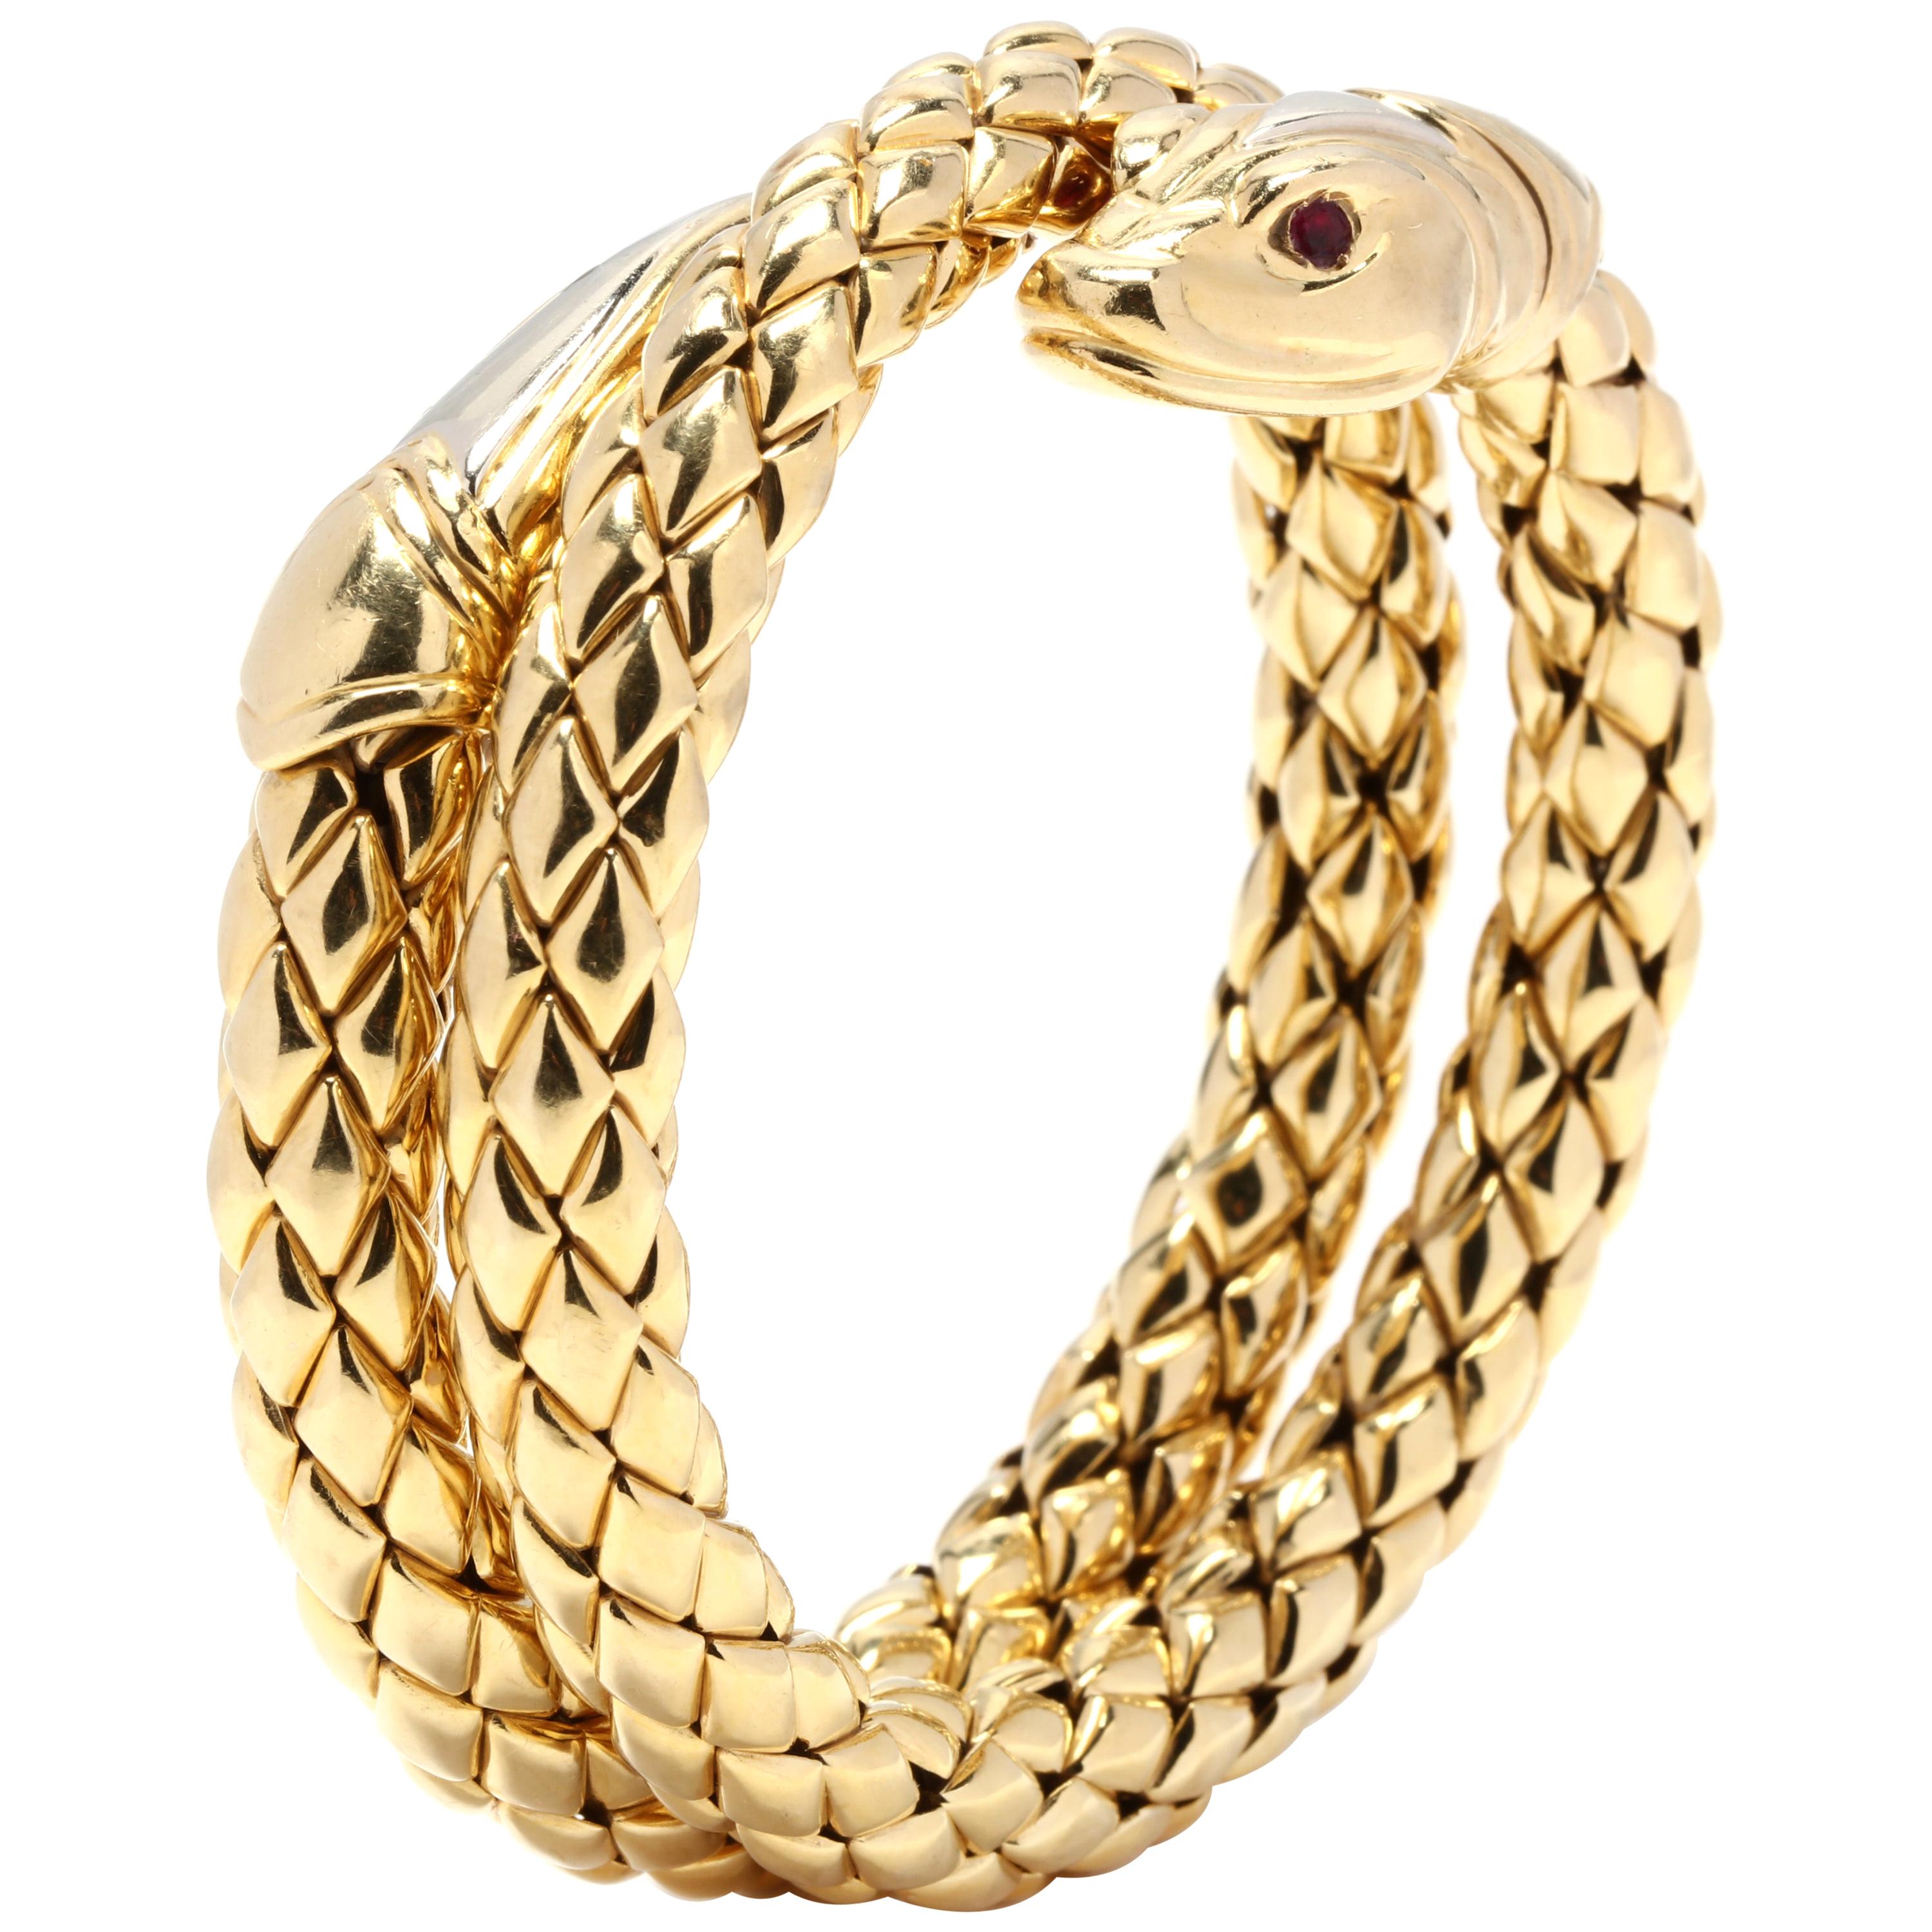 Chimento 18 Karat Yellow Gold and Ruby Double Coil Snake Bracelet